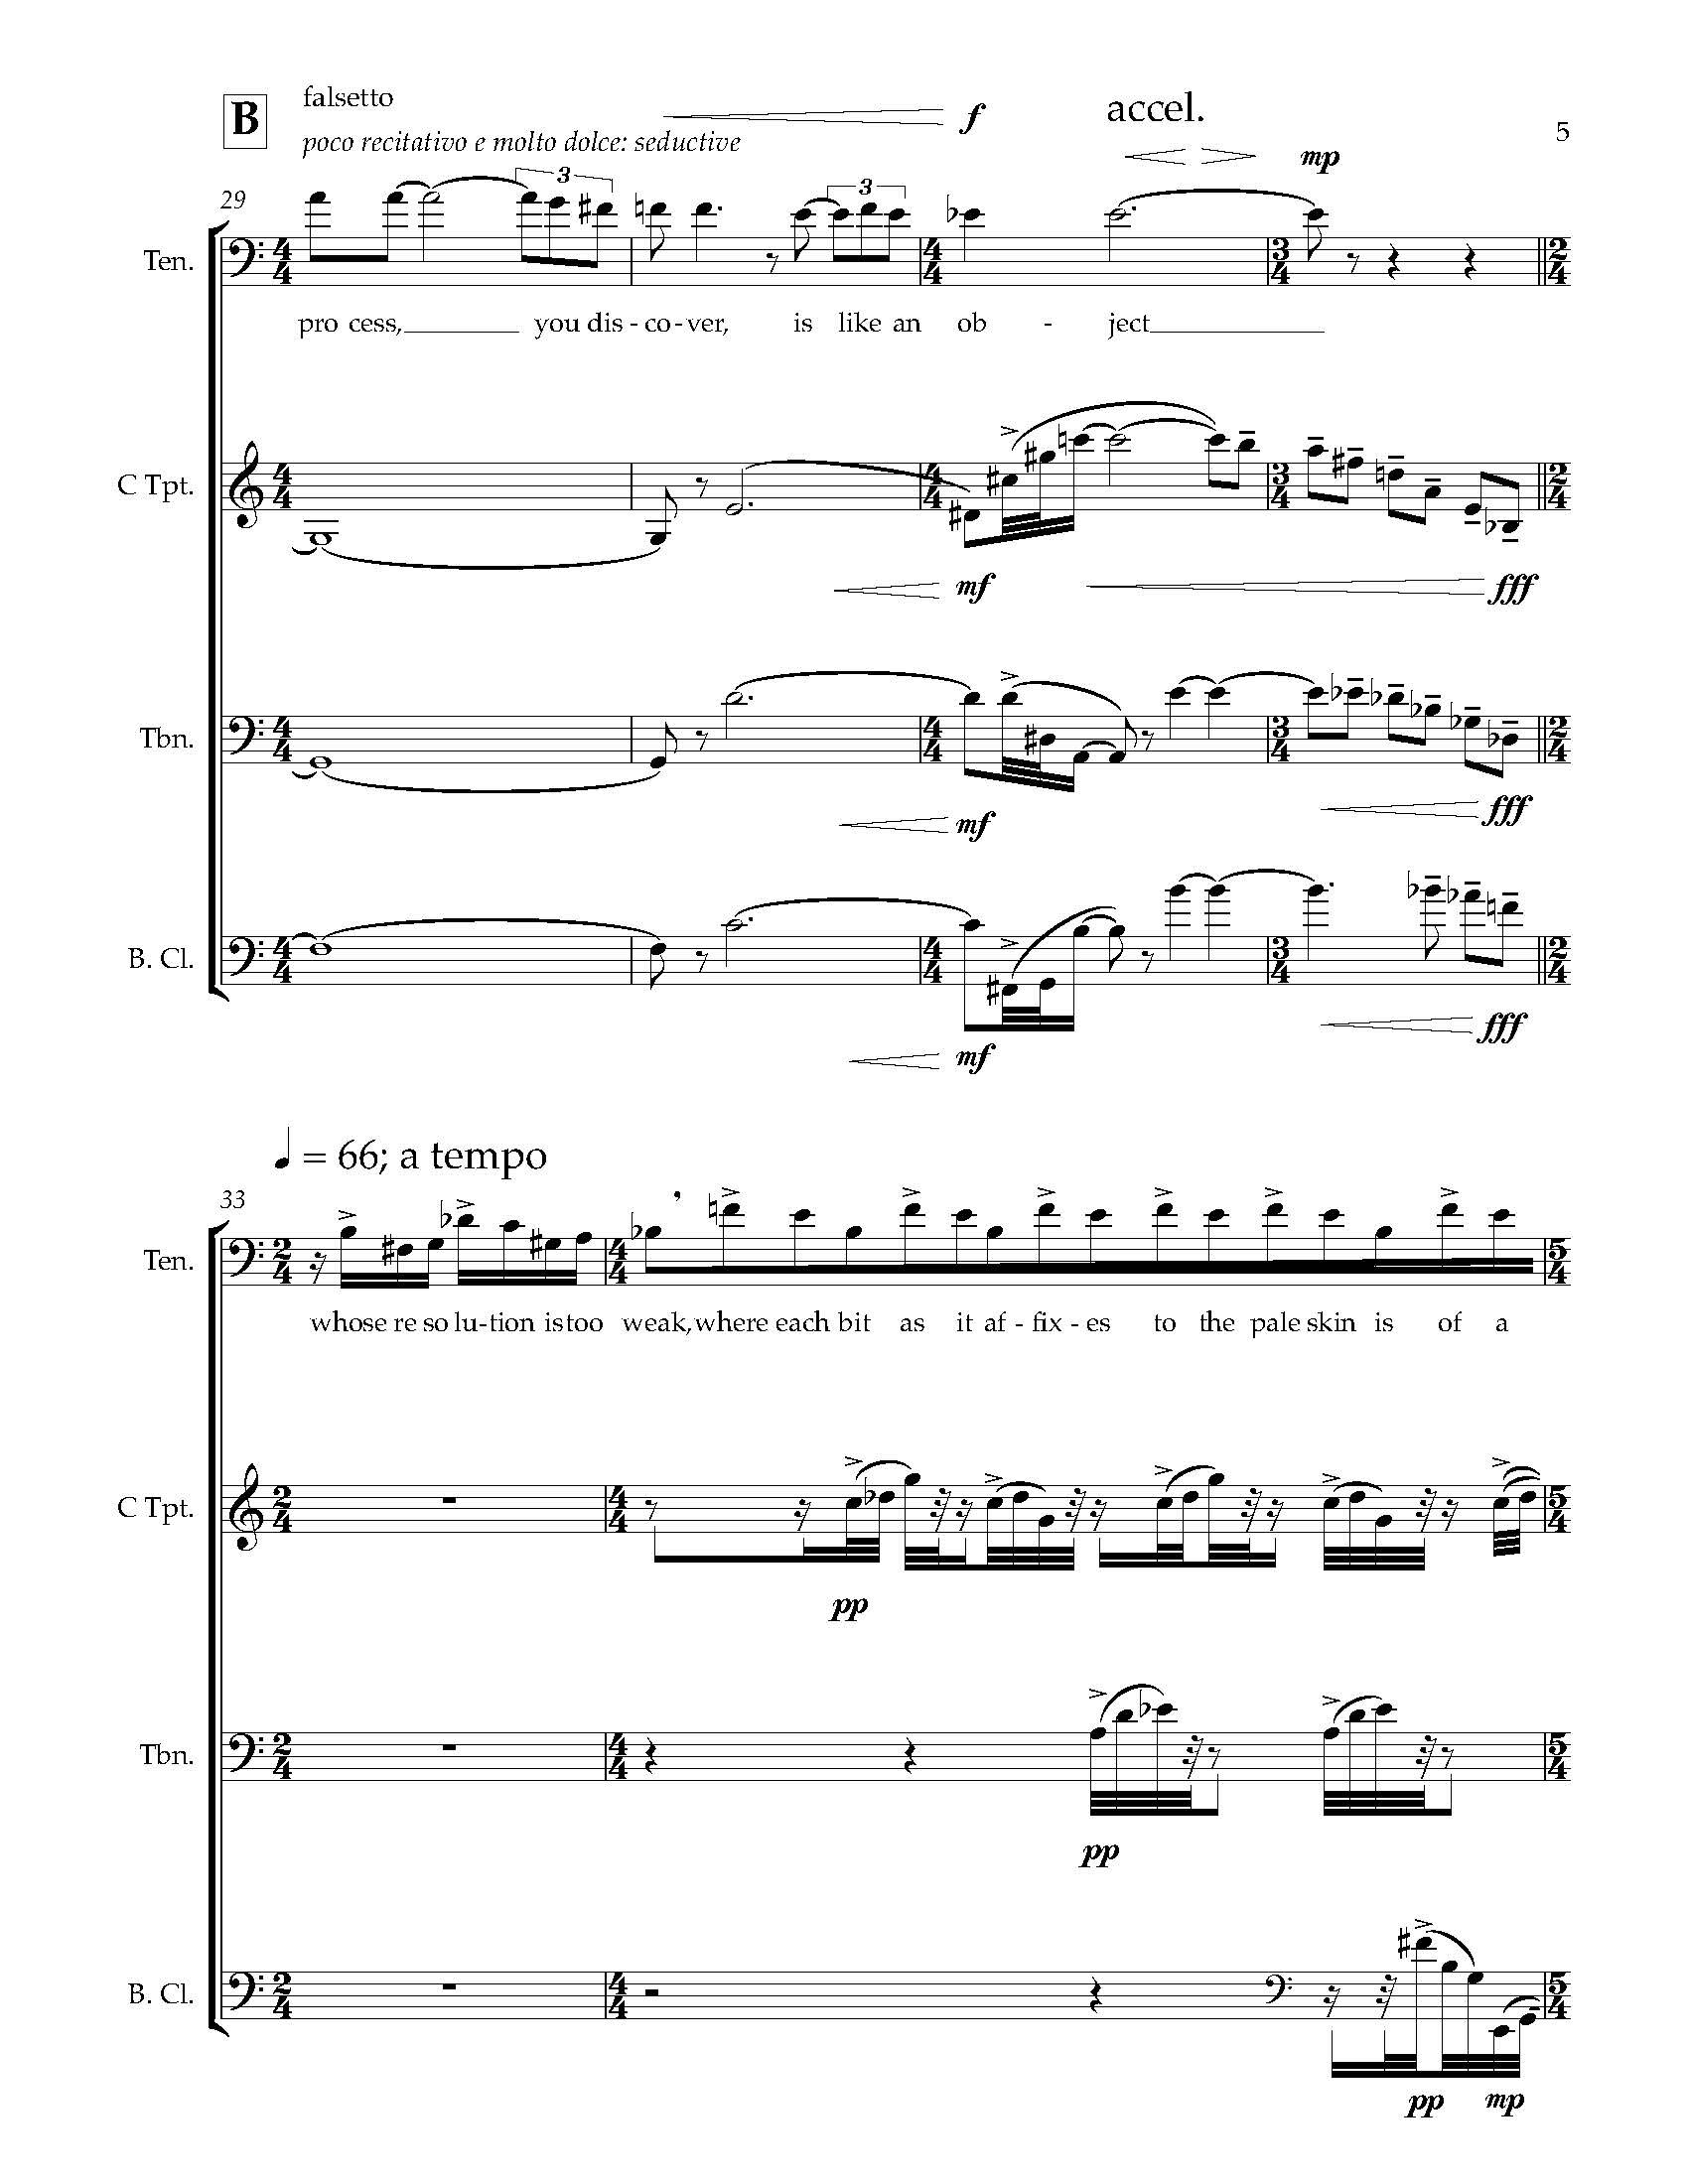 Many Worlds [1] - Complete Score_Page_14.jpg